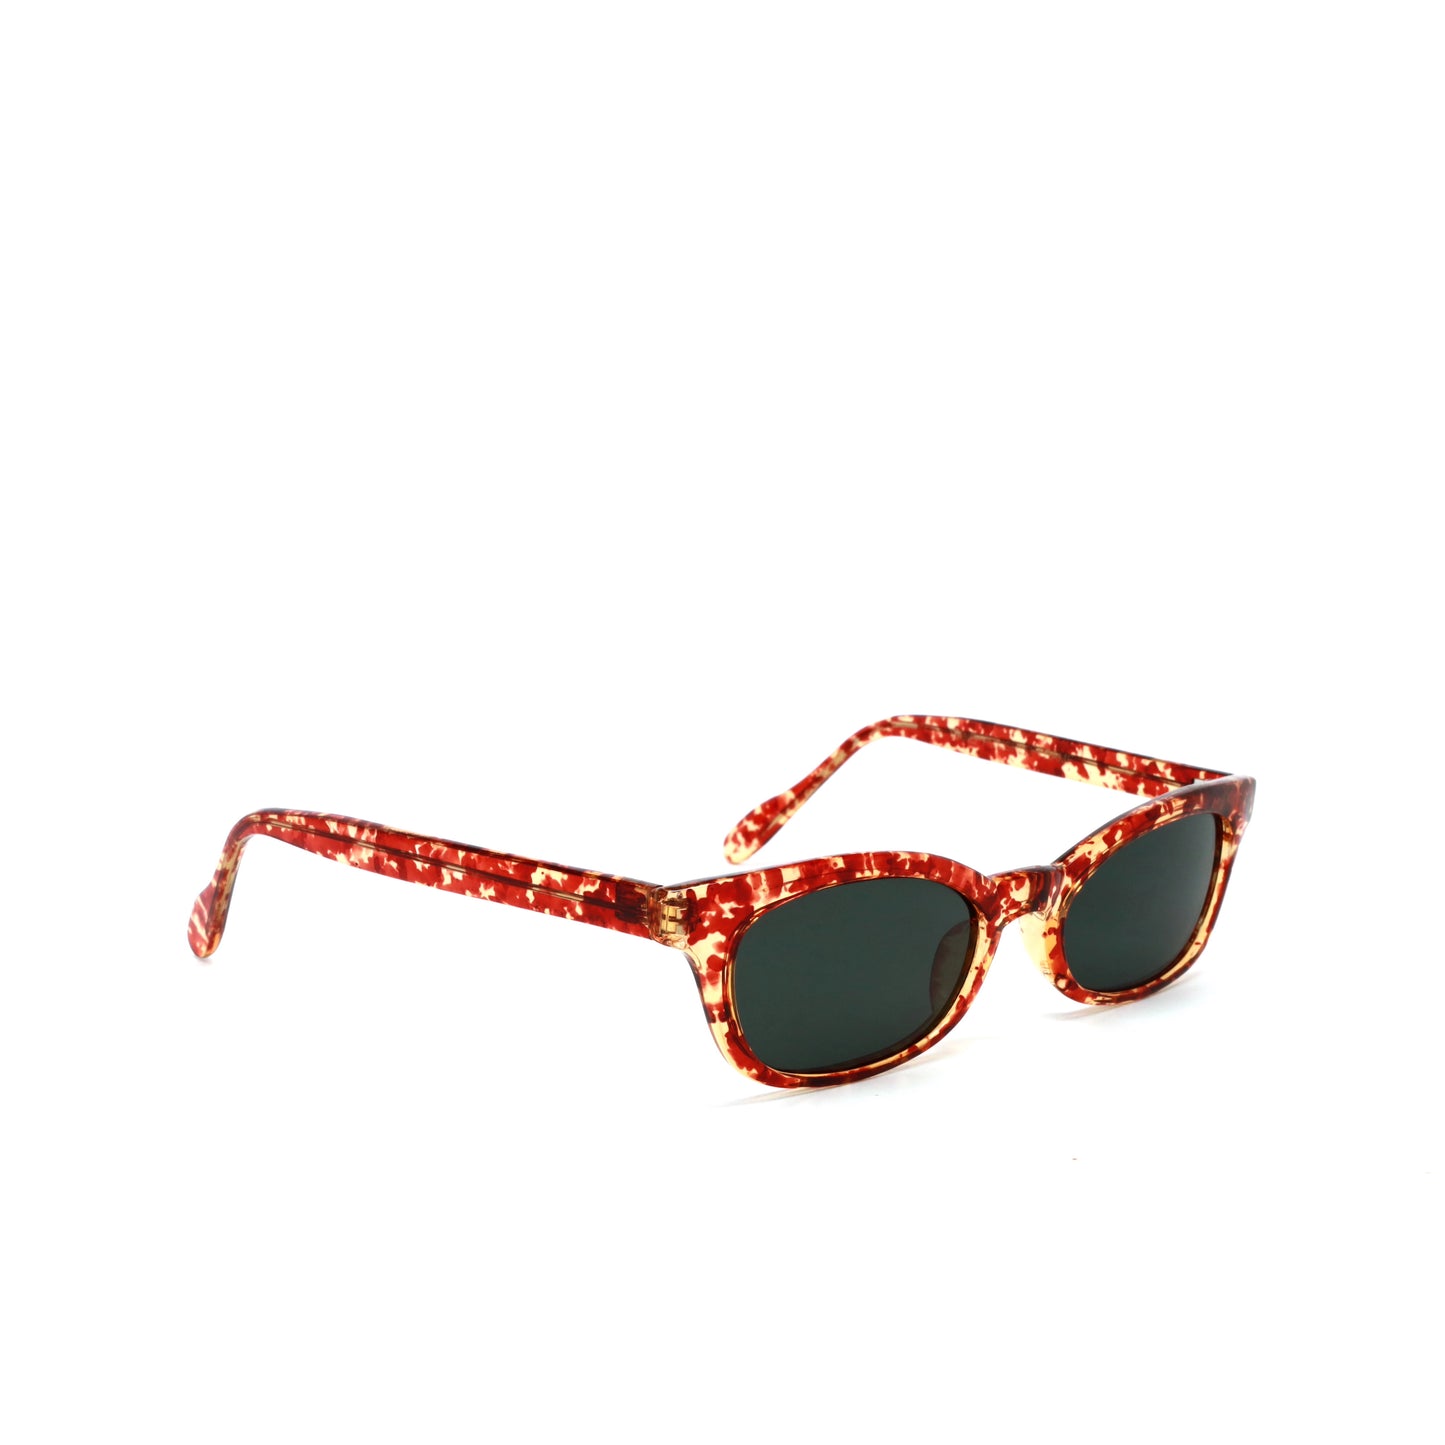 Vintage Small Sized 90s Mod Original Rectangle Sunglasses - Red